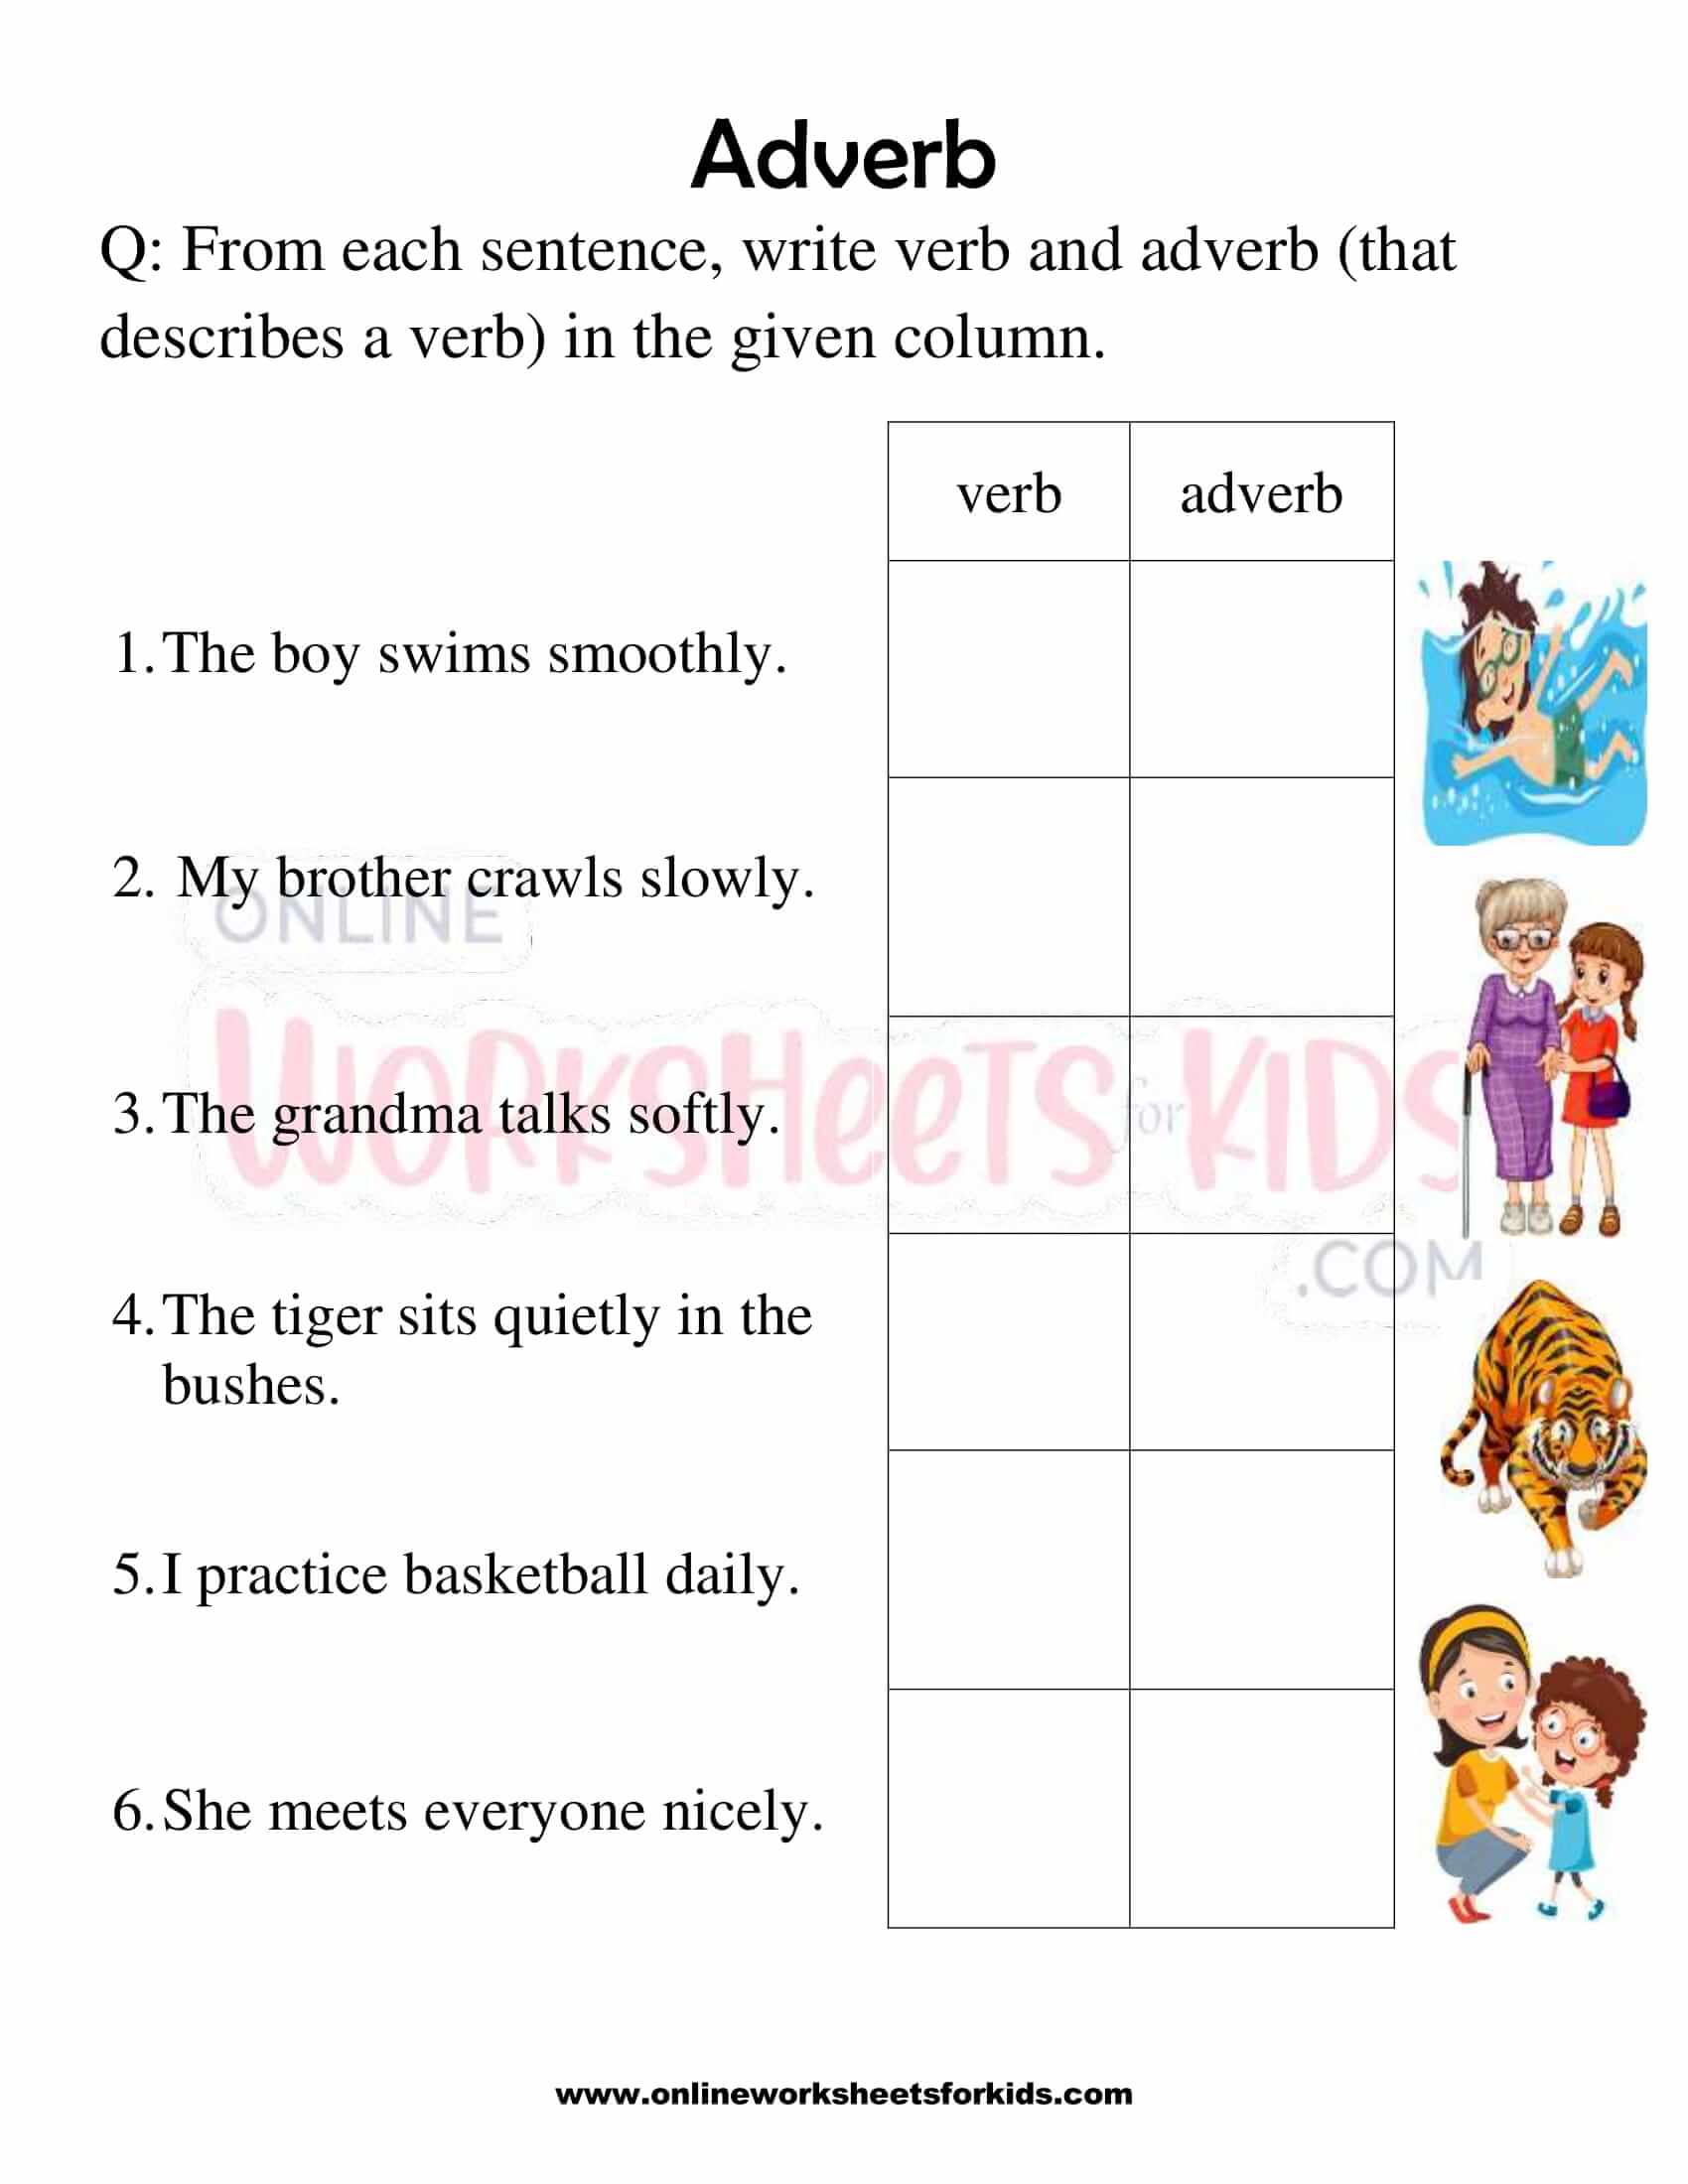 Adverb Exercises For Grade 5